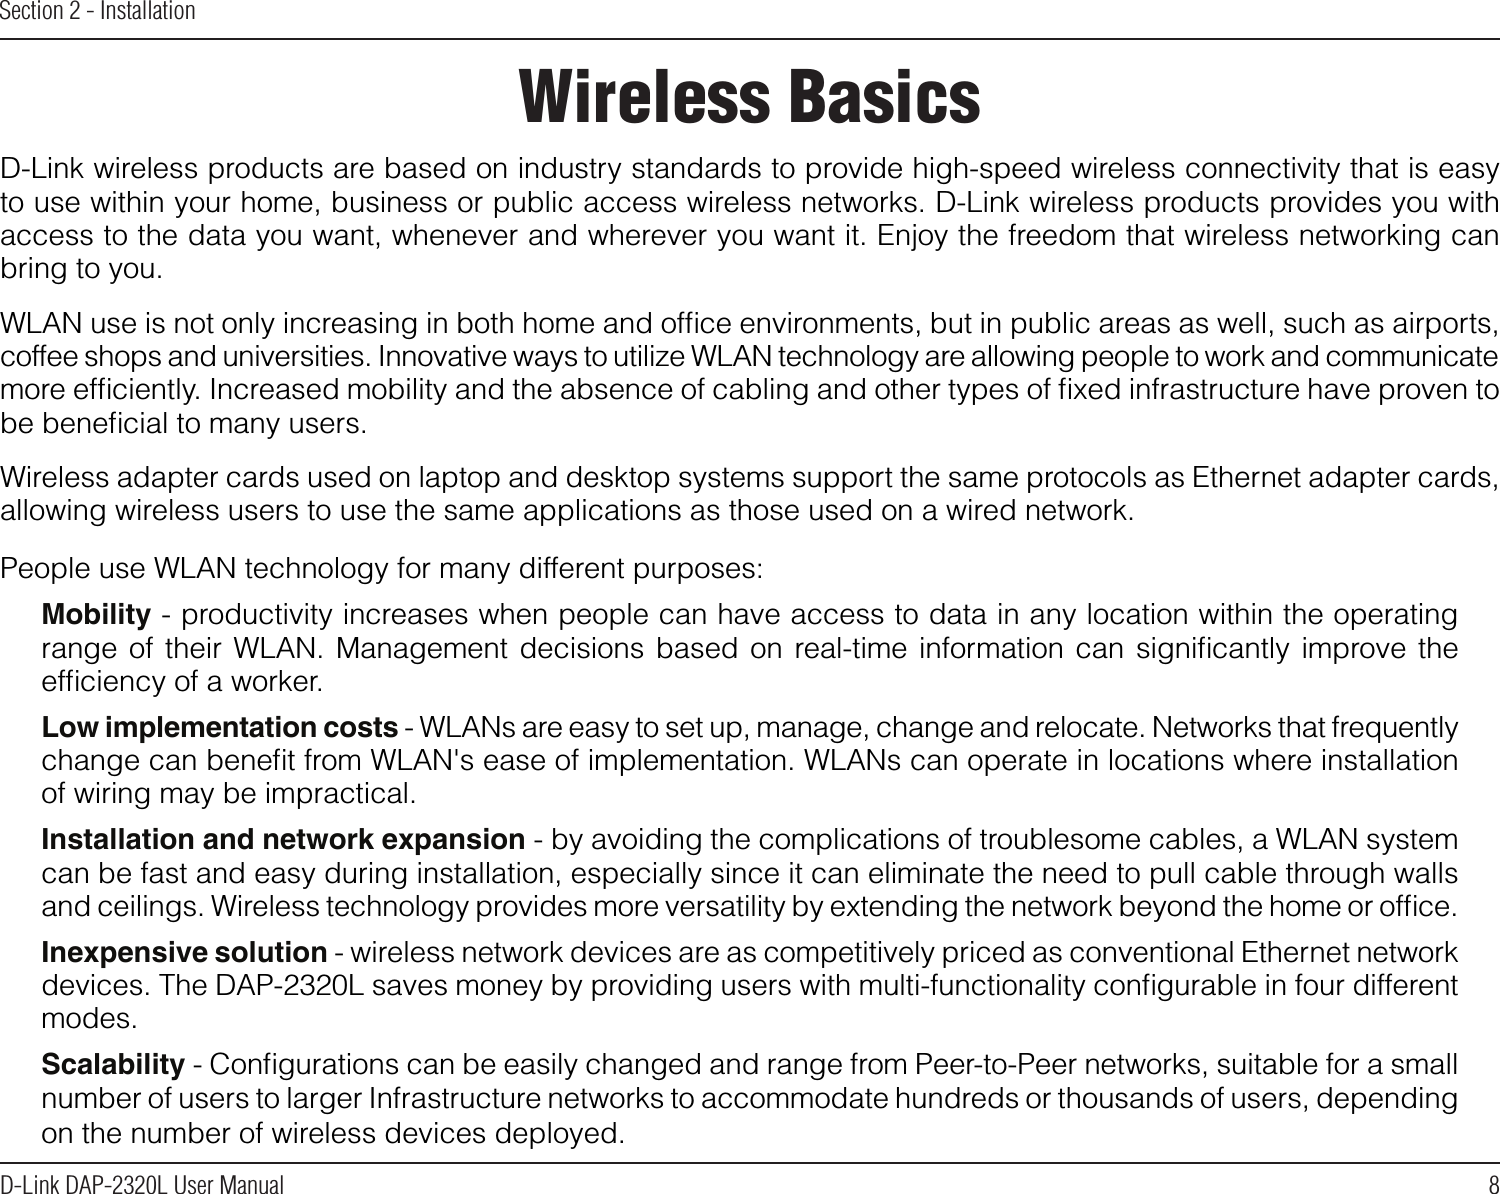 8D-Link DAP-2320L User ManualSection 2 - InstallationWireless BasicsD-Link wireless products are based on industry standards to provide high-speed wireless connectivity that is easy to use within your home, business or public access wireless networks. D-Link wireless products provides you with access to the data you want, whenever and wherever you want it. Enjoy the freedom that wireless networking can bring to you.WLAN use is not only increasing in both home and ofﬁce environments, but in public areas as well, such as airports, coffee shops and universities. Innovative ways to utilize WLAN technology are allowing people to work and communicate more efﬁciently. Increased mobility and the absence of cabling and other types of ﬁxed infrastructure have proven to be beneﬁcial to many users.  Wireless adapter cards used on laptop and desktop systems support the same protocols as Ethernet adapter cards, allowing wireless users to use the same applications as those used on a wired network.People use WLAN technology for many different purposes:Mobility - productivity increases when people can have access to data in any location within the operating range of  their  WLAN.  Management  decisions  based  on real-time information can  signiﬁcantly  improve the efﬁciency of a worker.Low implementation costs - WLANs are easy to set up, manage, change and relocate. Networks that frequently change can beneﬁt from WLAN&apos;s ease of implementation. WLANs can operate in locations where installation of wiring may be impractical.Installation and network expansion - by avoiding the complications of troublesome cables, a WLAN system can be fast and easy during installation, especially since it can eliminate the need to pull cable through walls and ceilings. Wireless technology provides more versatility by extending the network beyond the home or ofﬁce.Inexpensive solution - wireless network devices are as competitively priced as conventional Ethernet network devices. The DAP-2320L saves money by providing users with multi-functionality conﬁgurable in four different modes.Scalability - Conﬁgurations can be easily changed and range from Peer-to-Peer networks, suitable for a small number of users to larger Infrastructure networks to accommodate hundreds or thousands of users, depending on the number of wireless devices deployed.